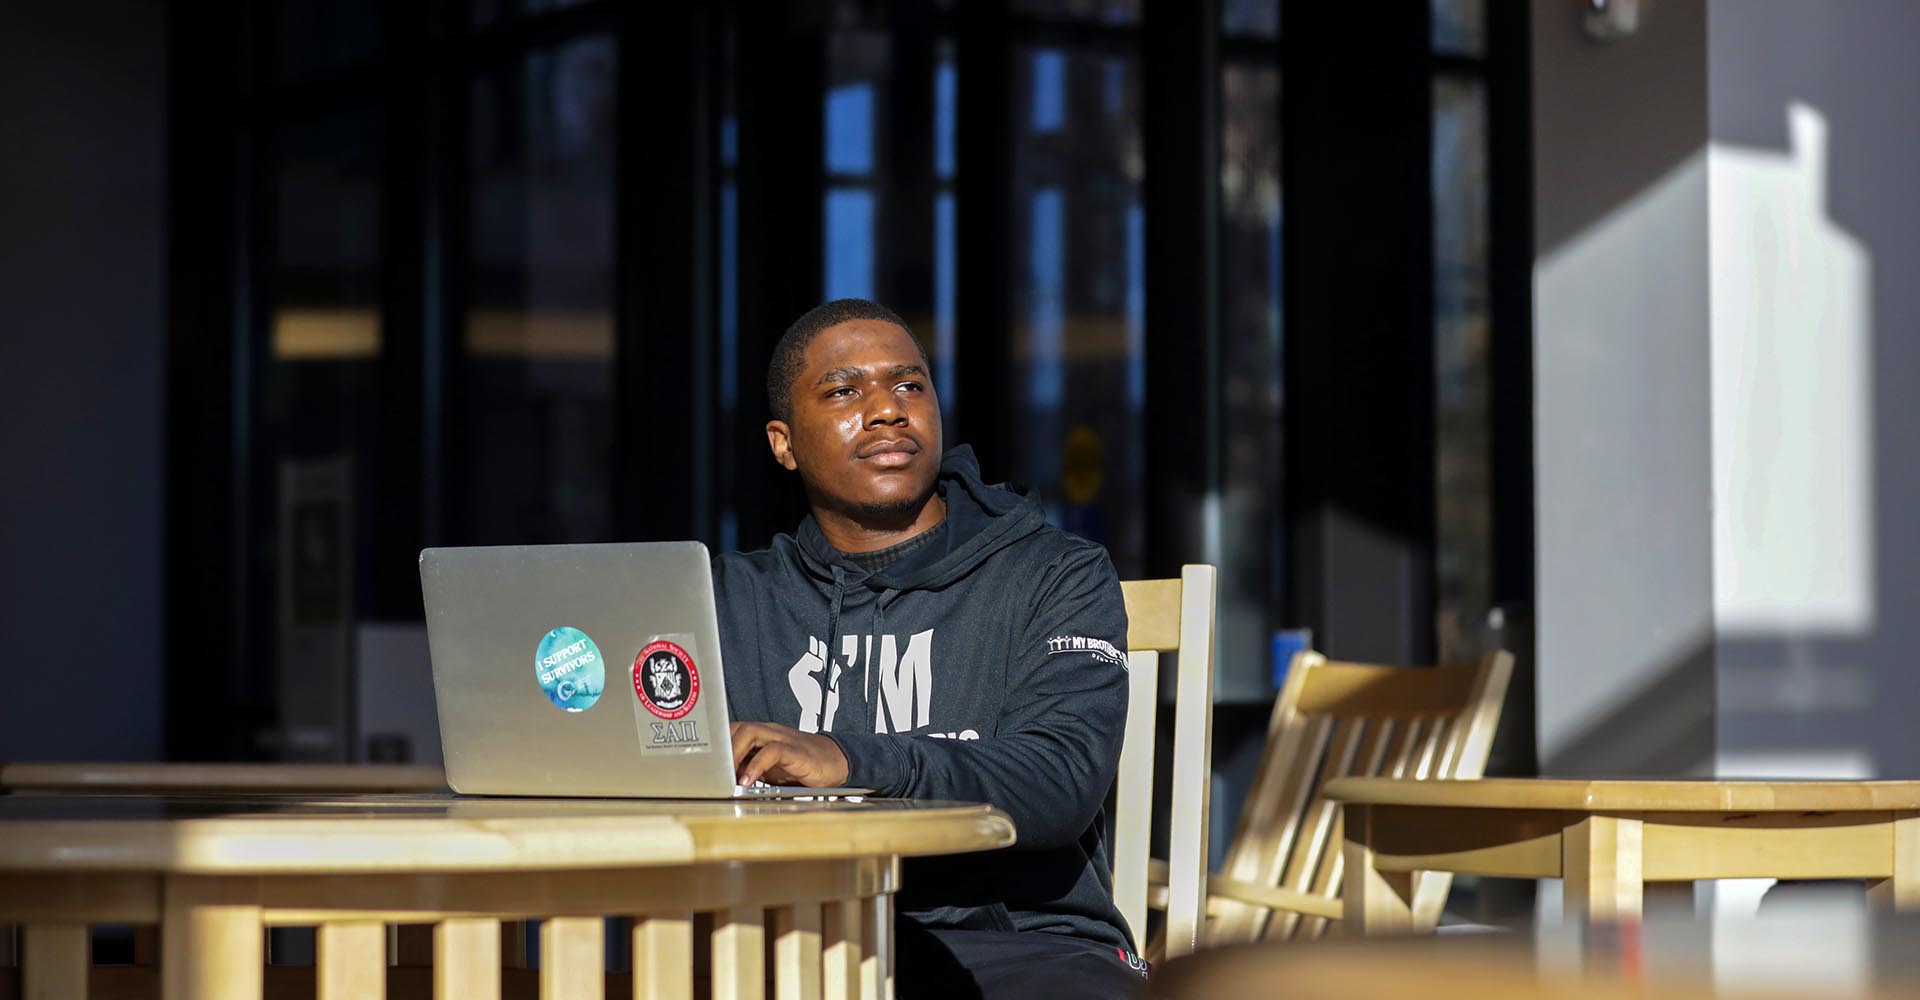 MSU Denver junior takes on the education gap, a barrier to top jobs